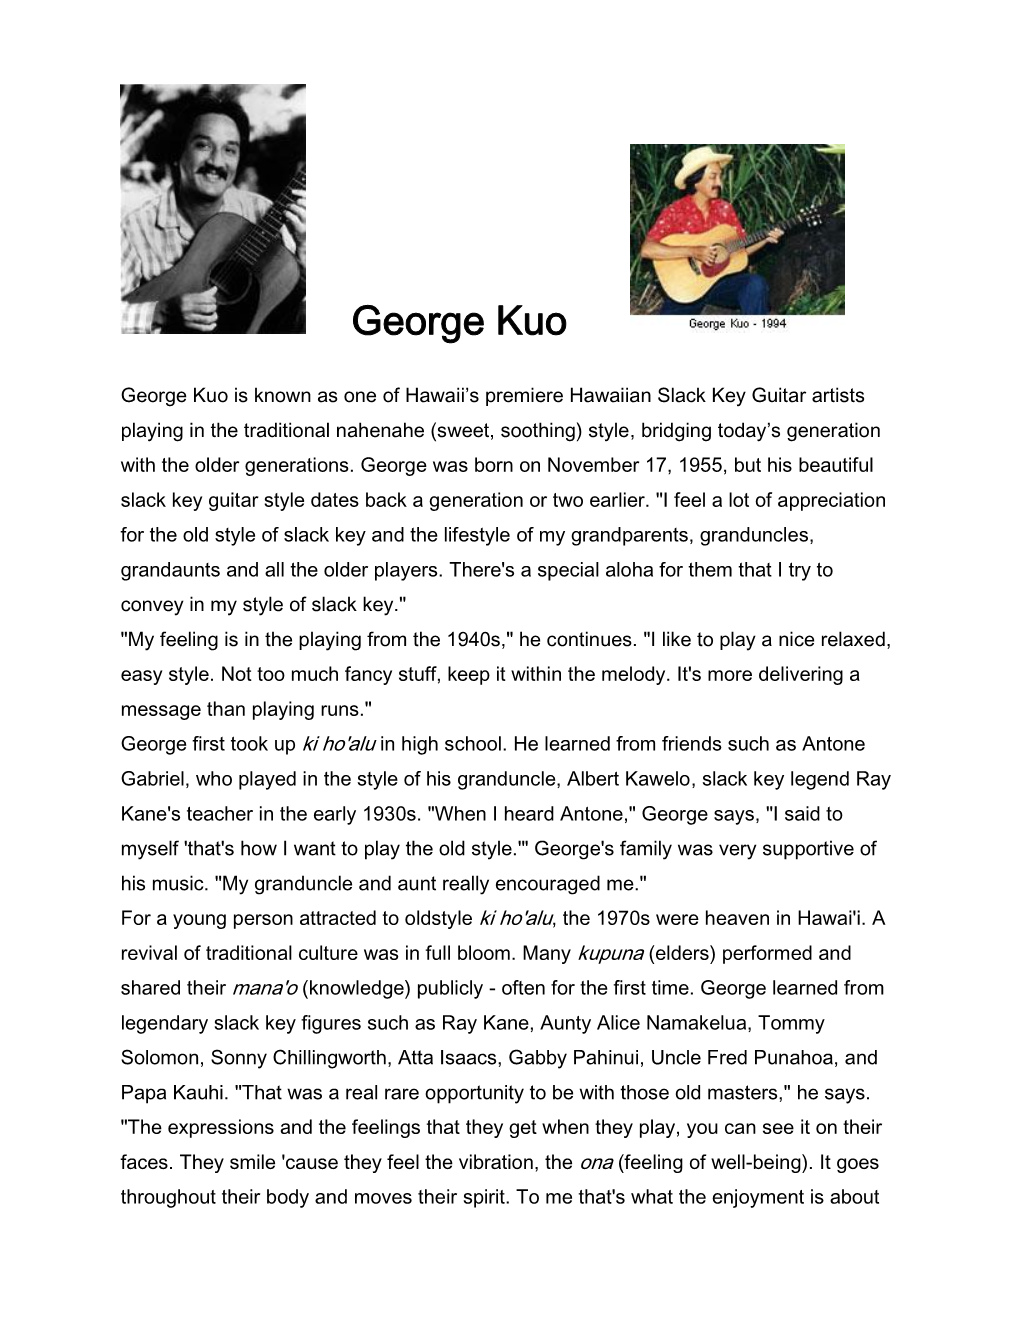 George Kuo Bio in PDF Format HERE